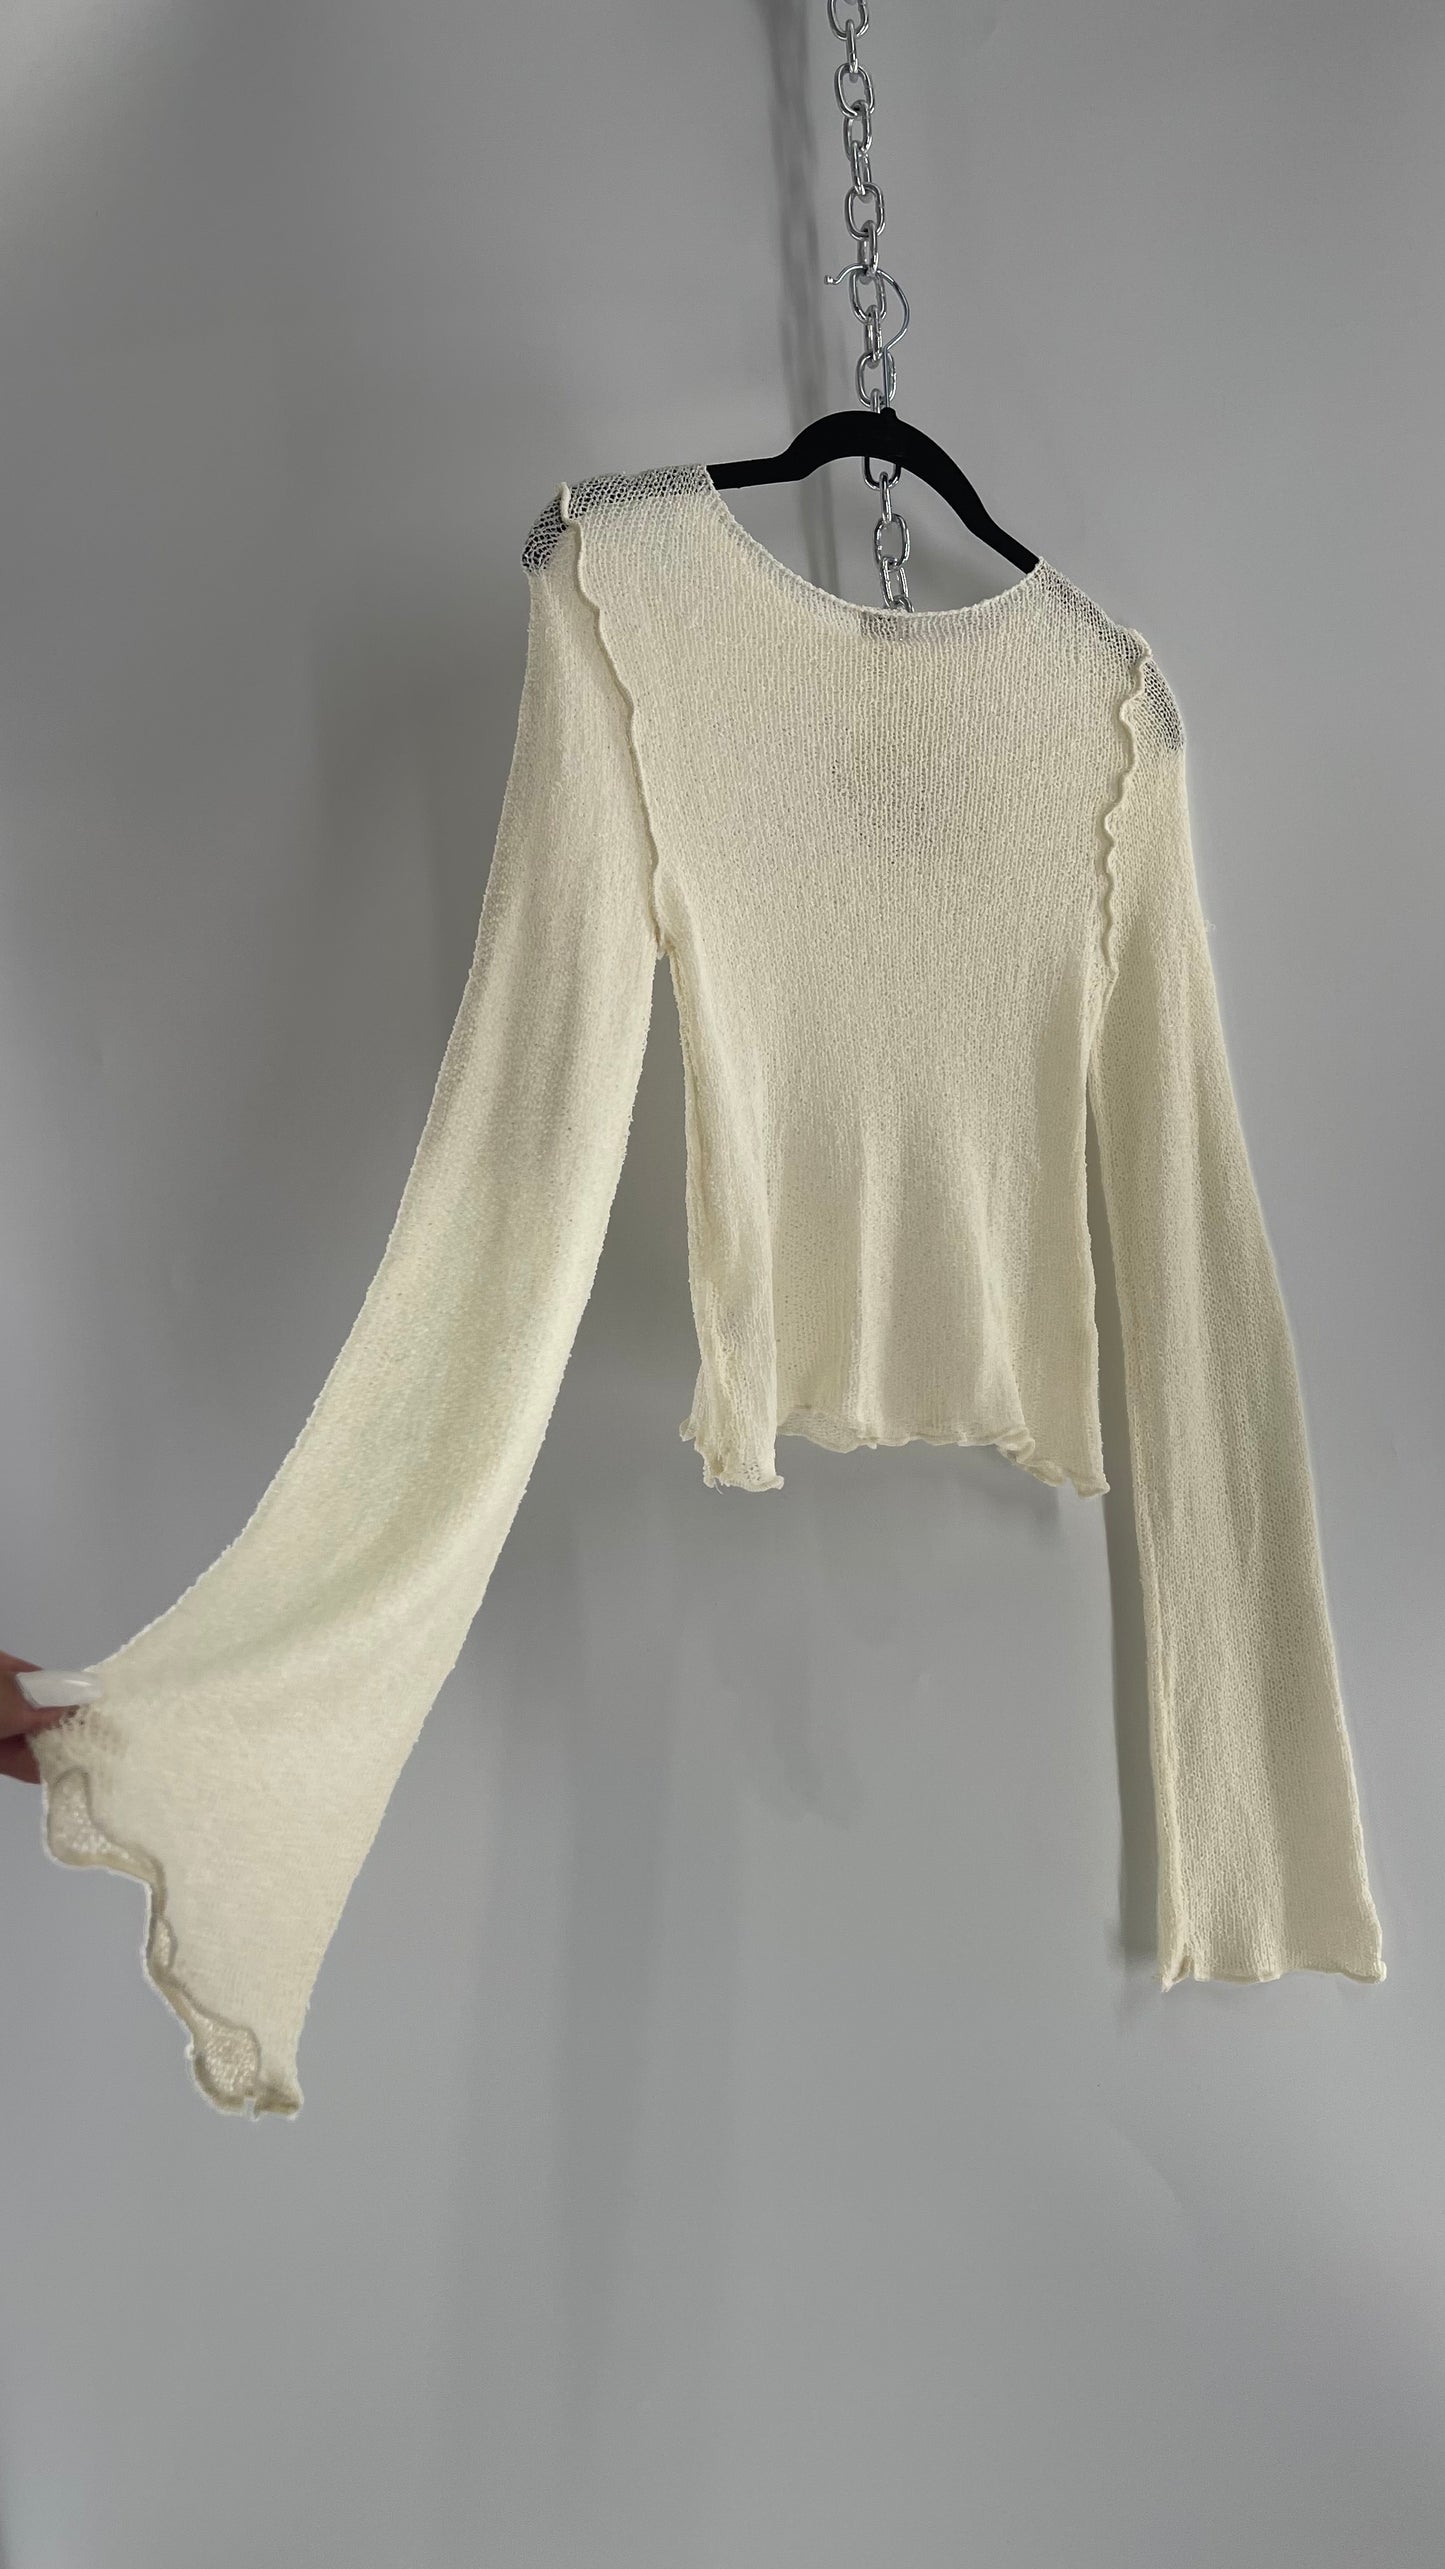 BDG Off White Open Knit Bell Sleeve with Exposed Seams (Large)